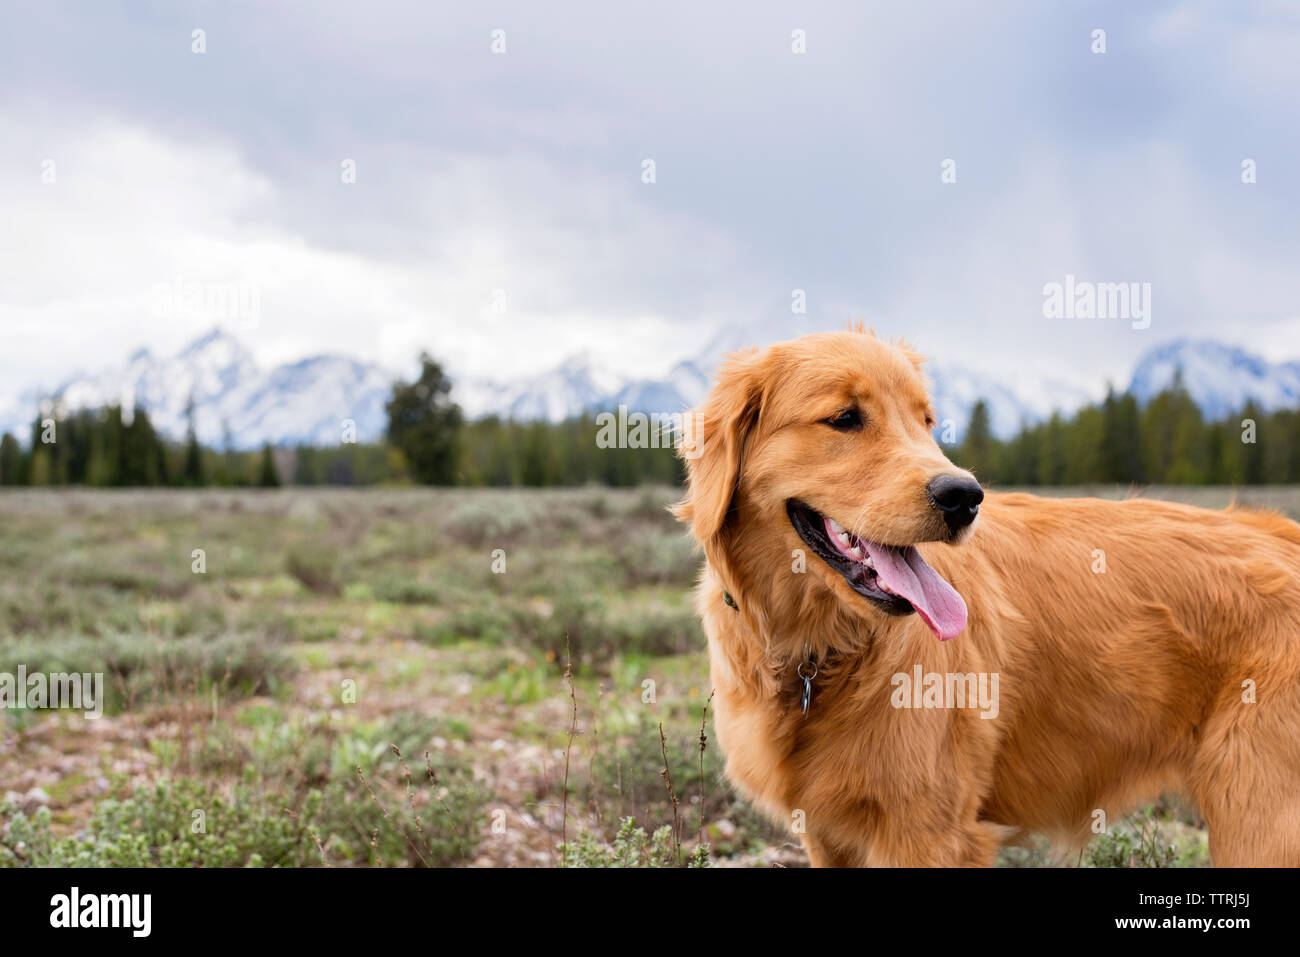 Dog sticking out tongue while standing on field during winter Stock Photo